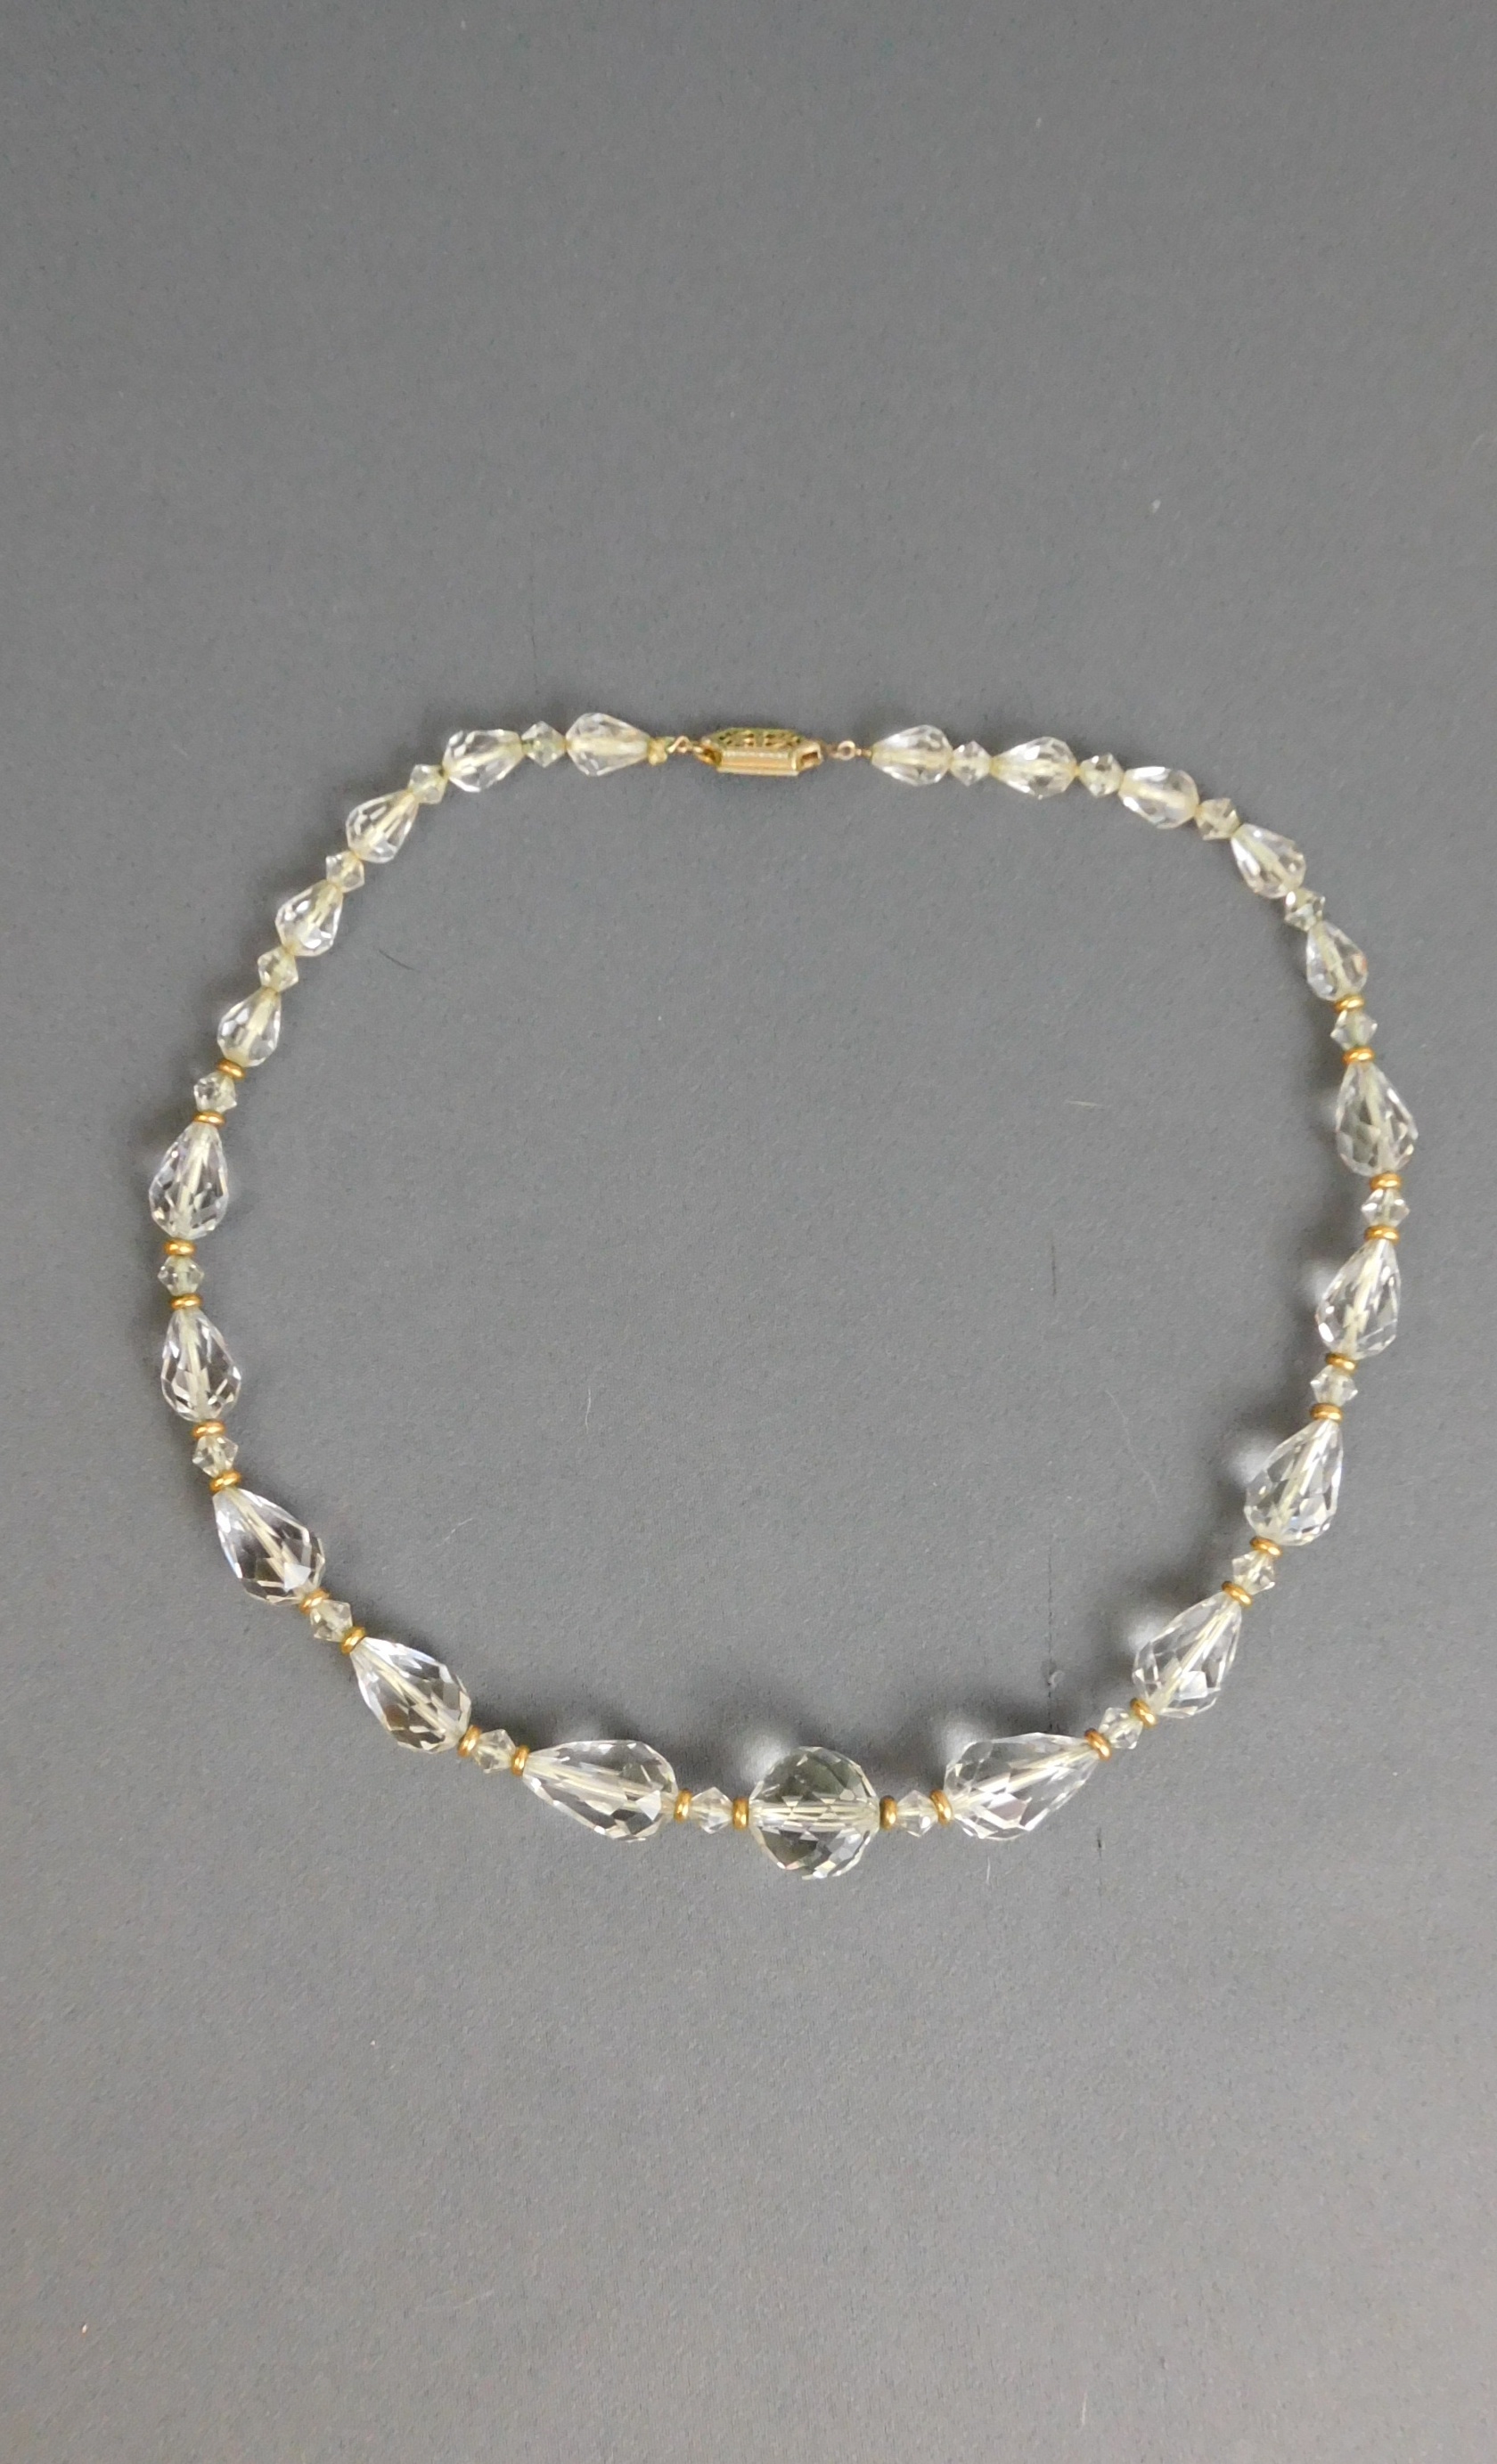 Vintage 1950s Crystal Necklace Choker with Gold Spacers, 1950s, 16 inches